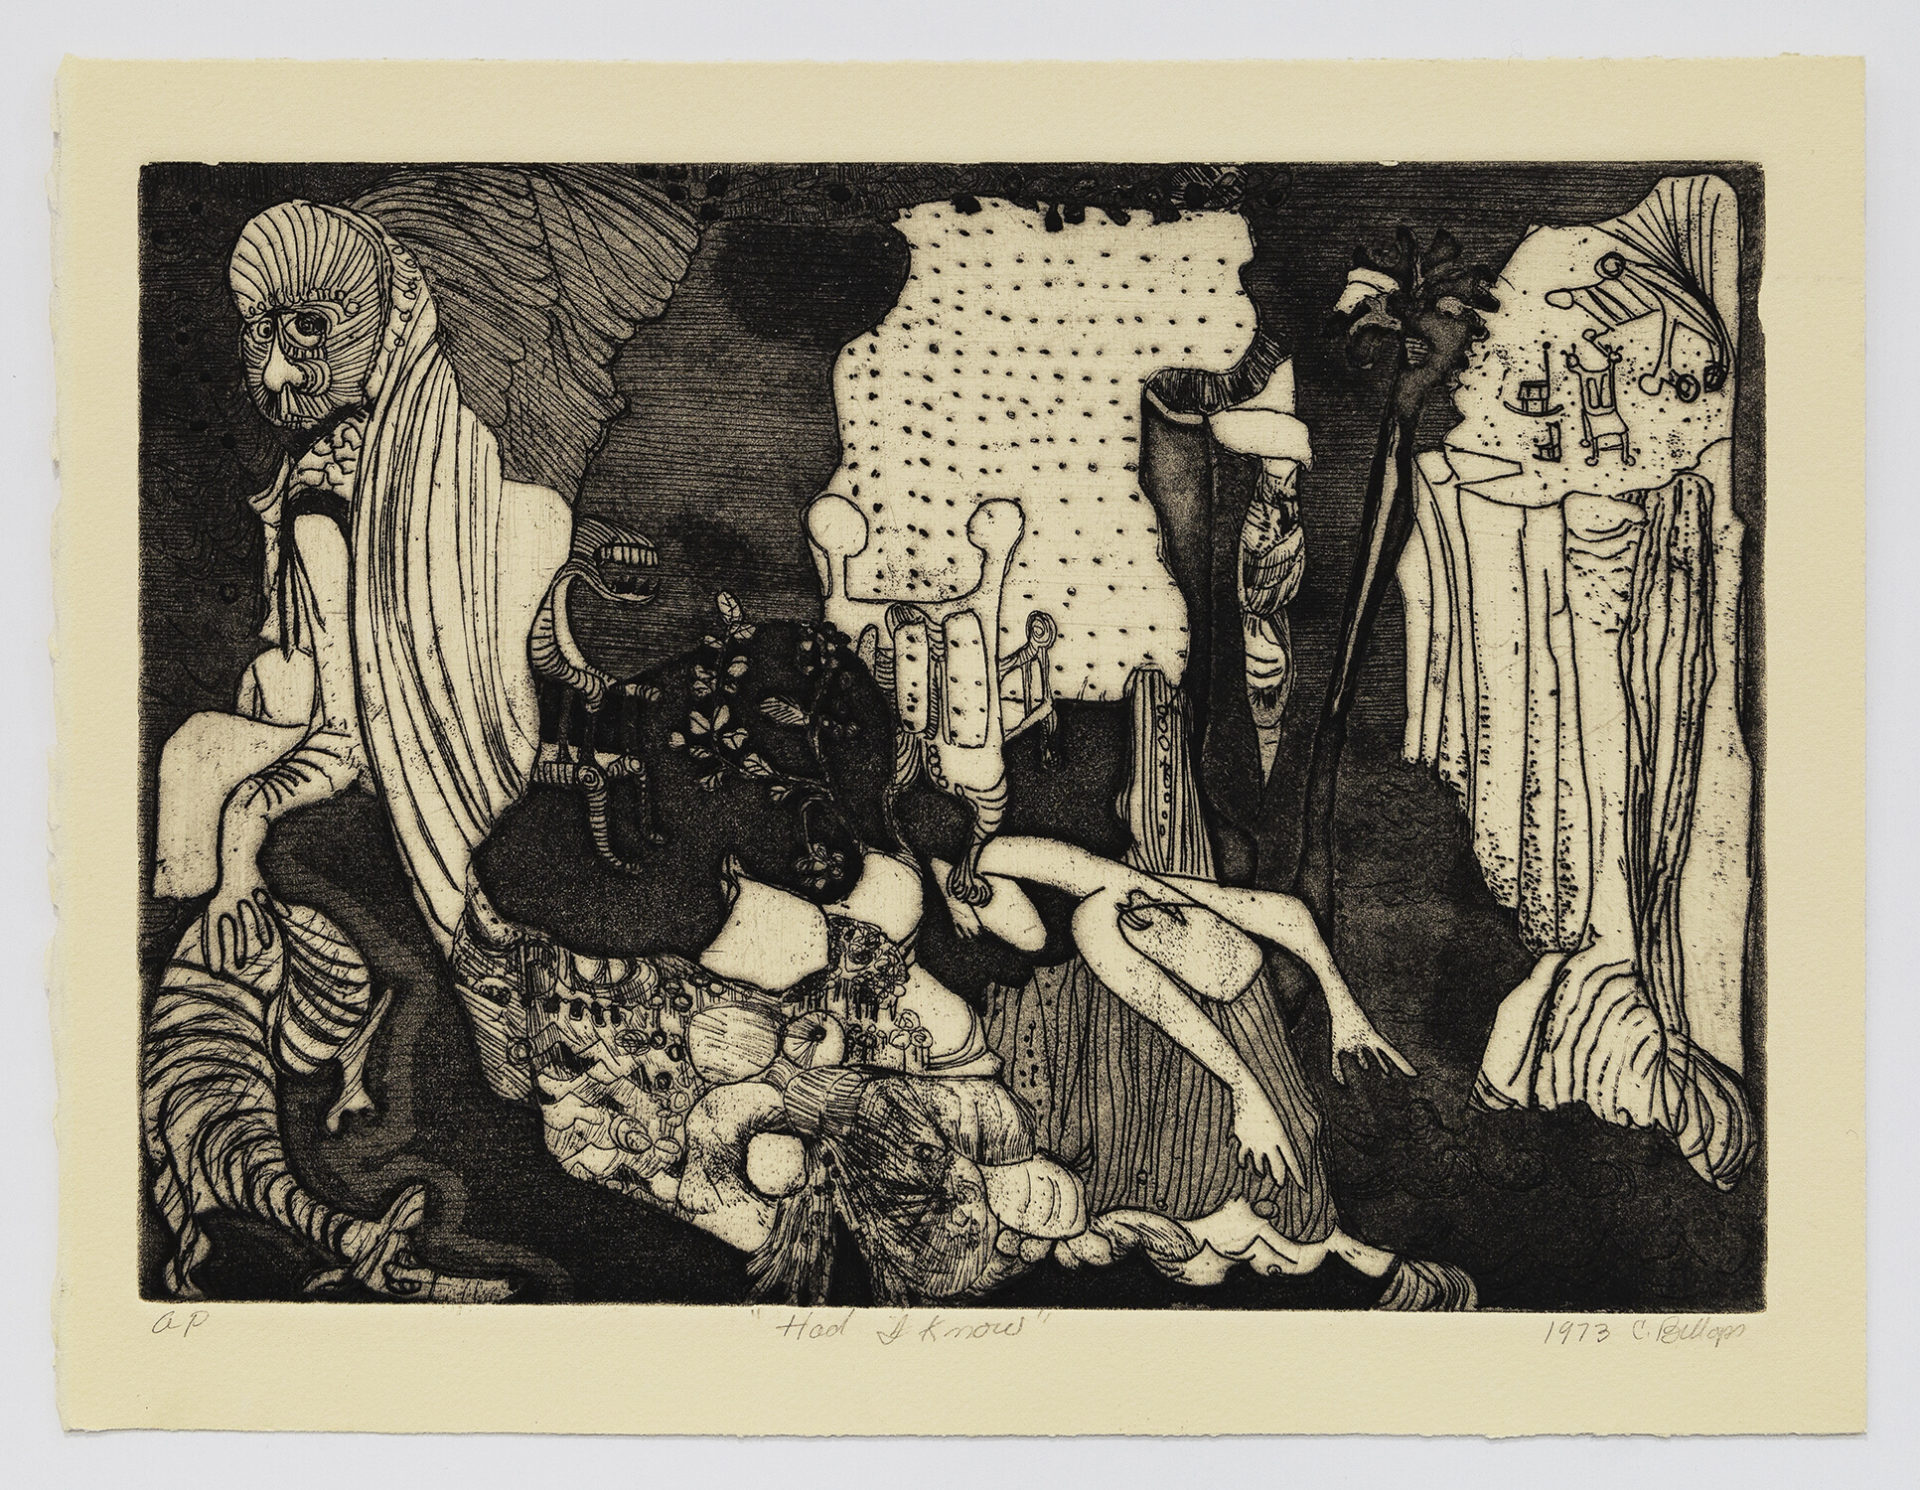 Camille Billops, Had I Know, 1973, Etching and aquatint, 10 x 13 inches (25.4 x 33 cm), Edition of 10